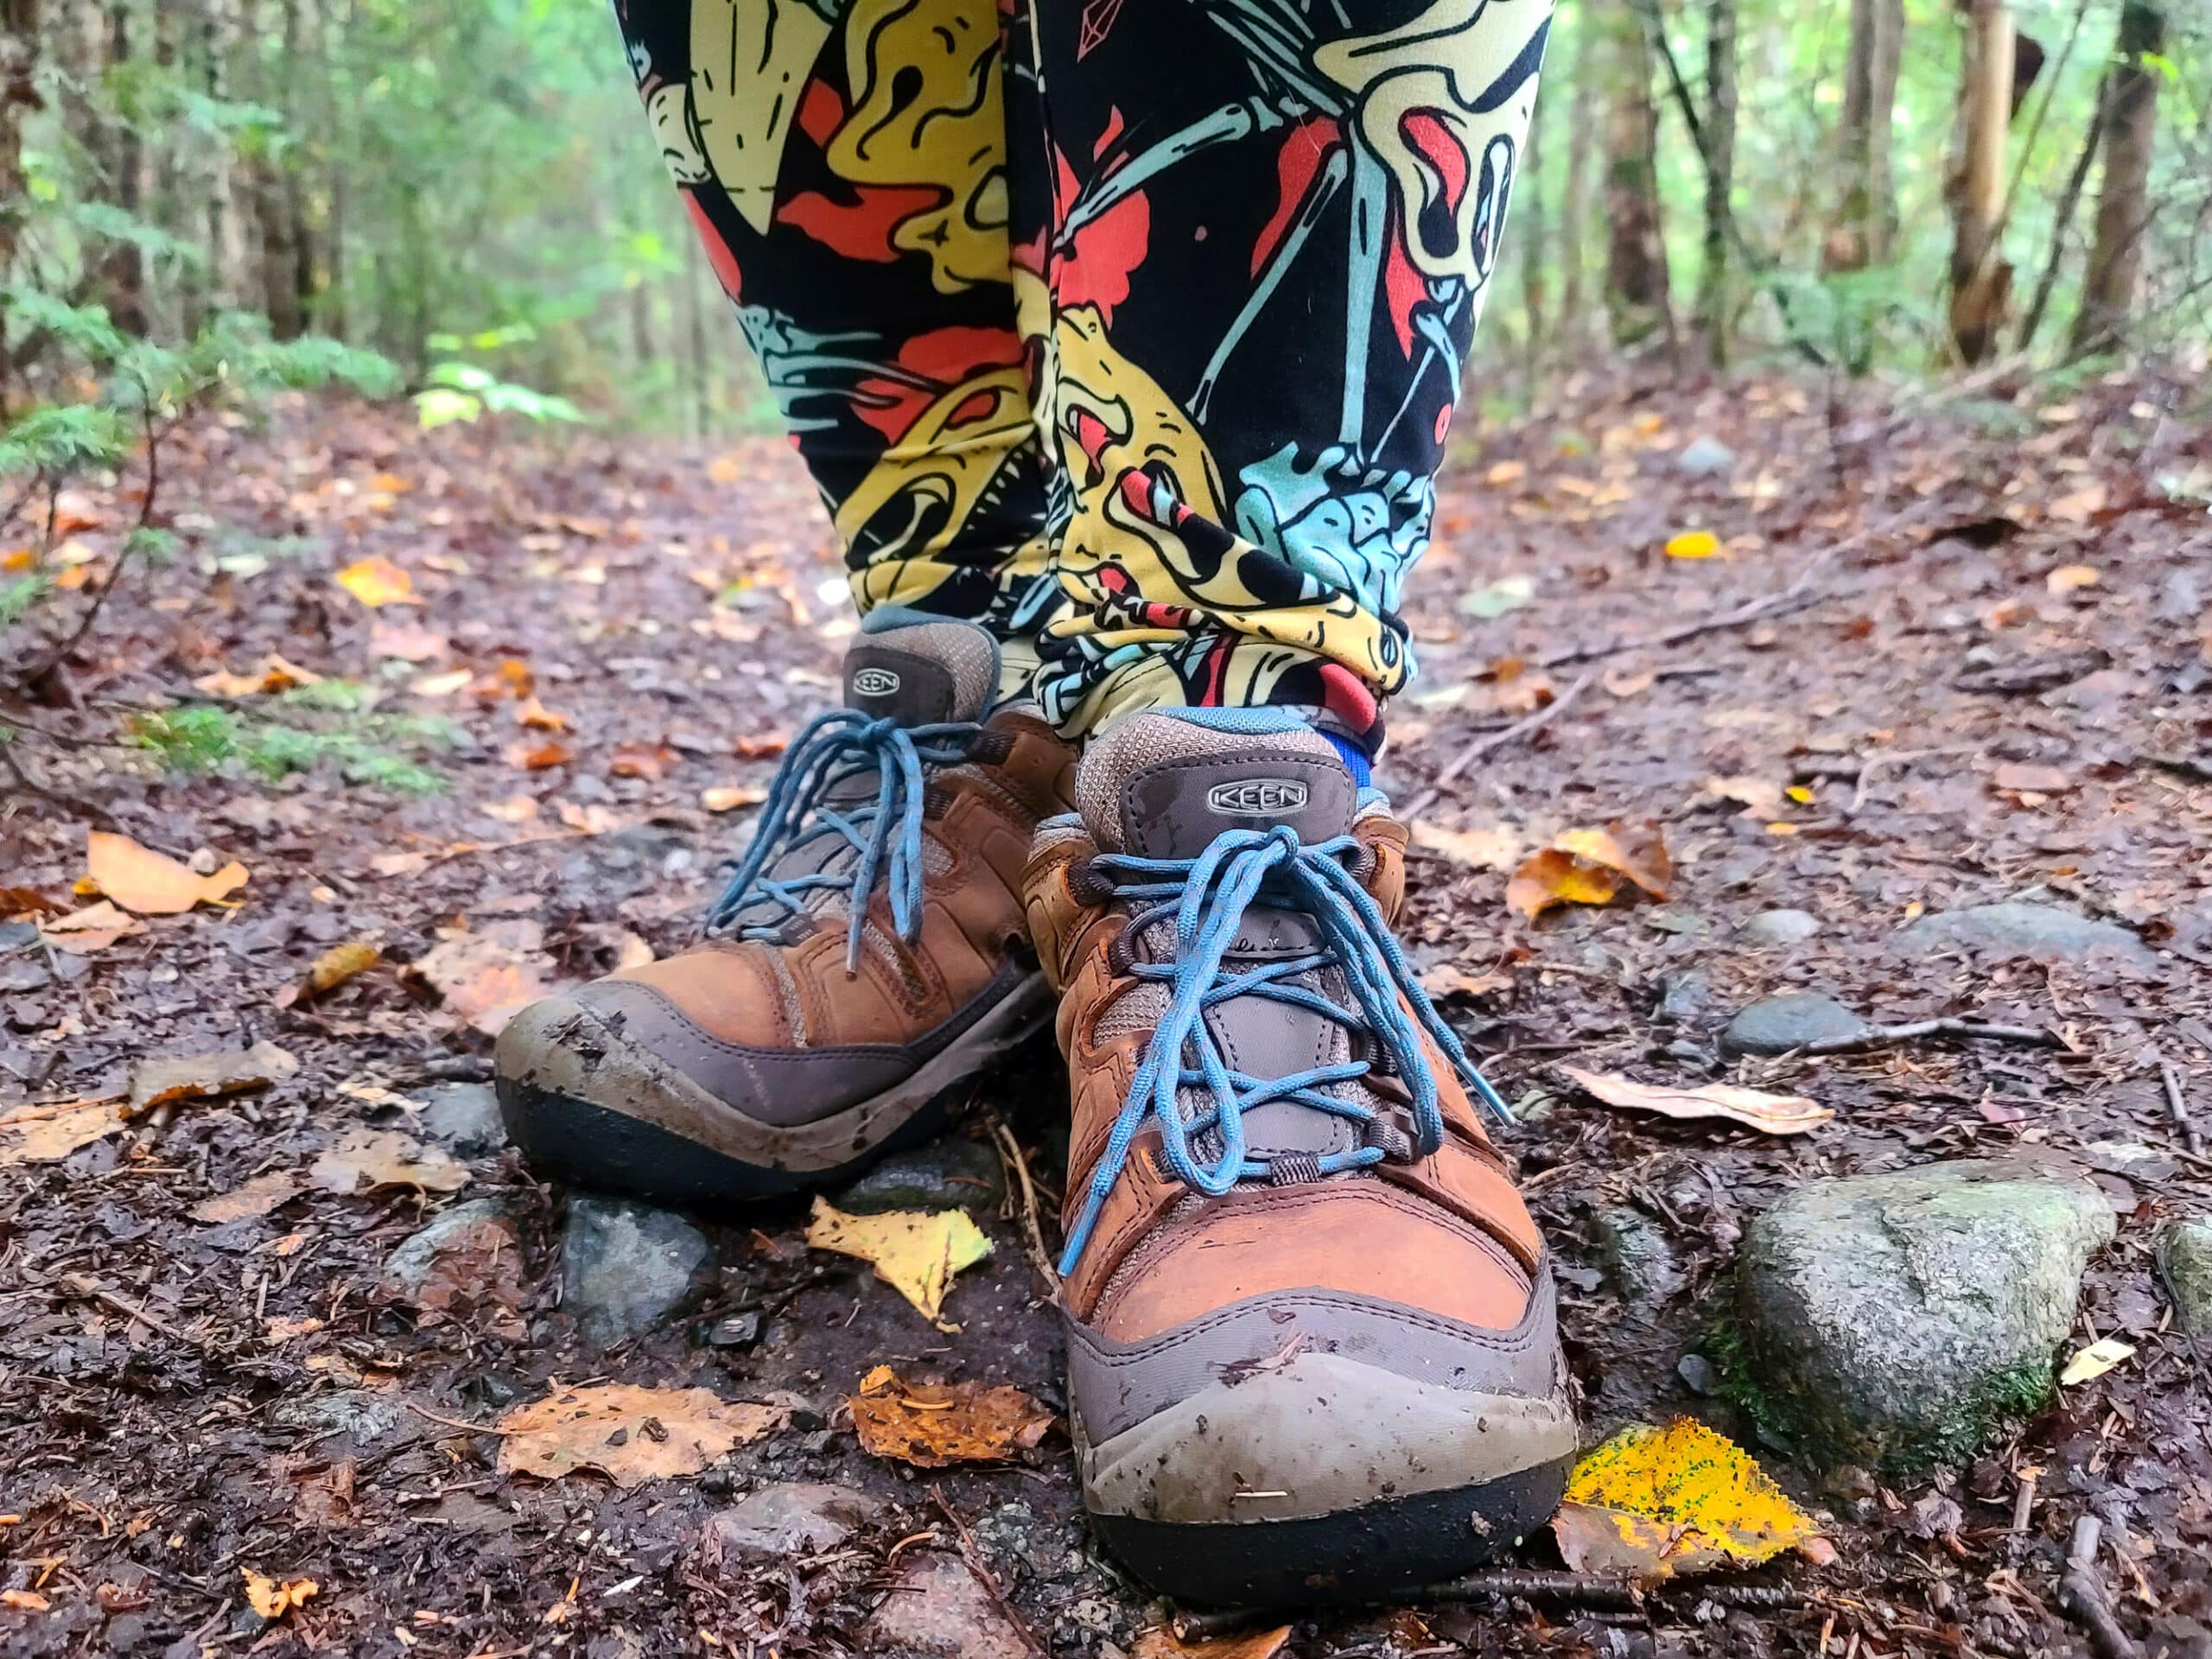 Feet and ankles of a woman wearing dinosaur themed tights and hiking boots.